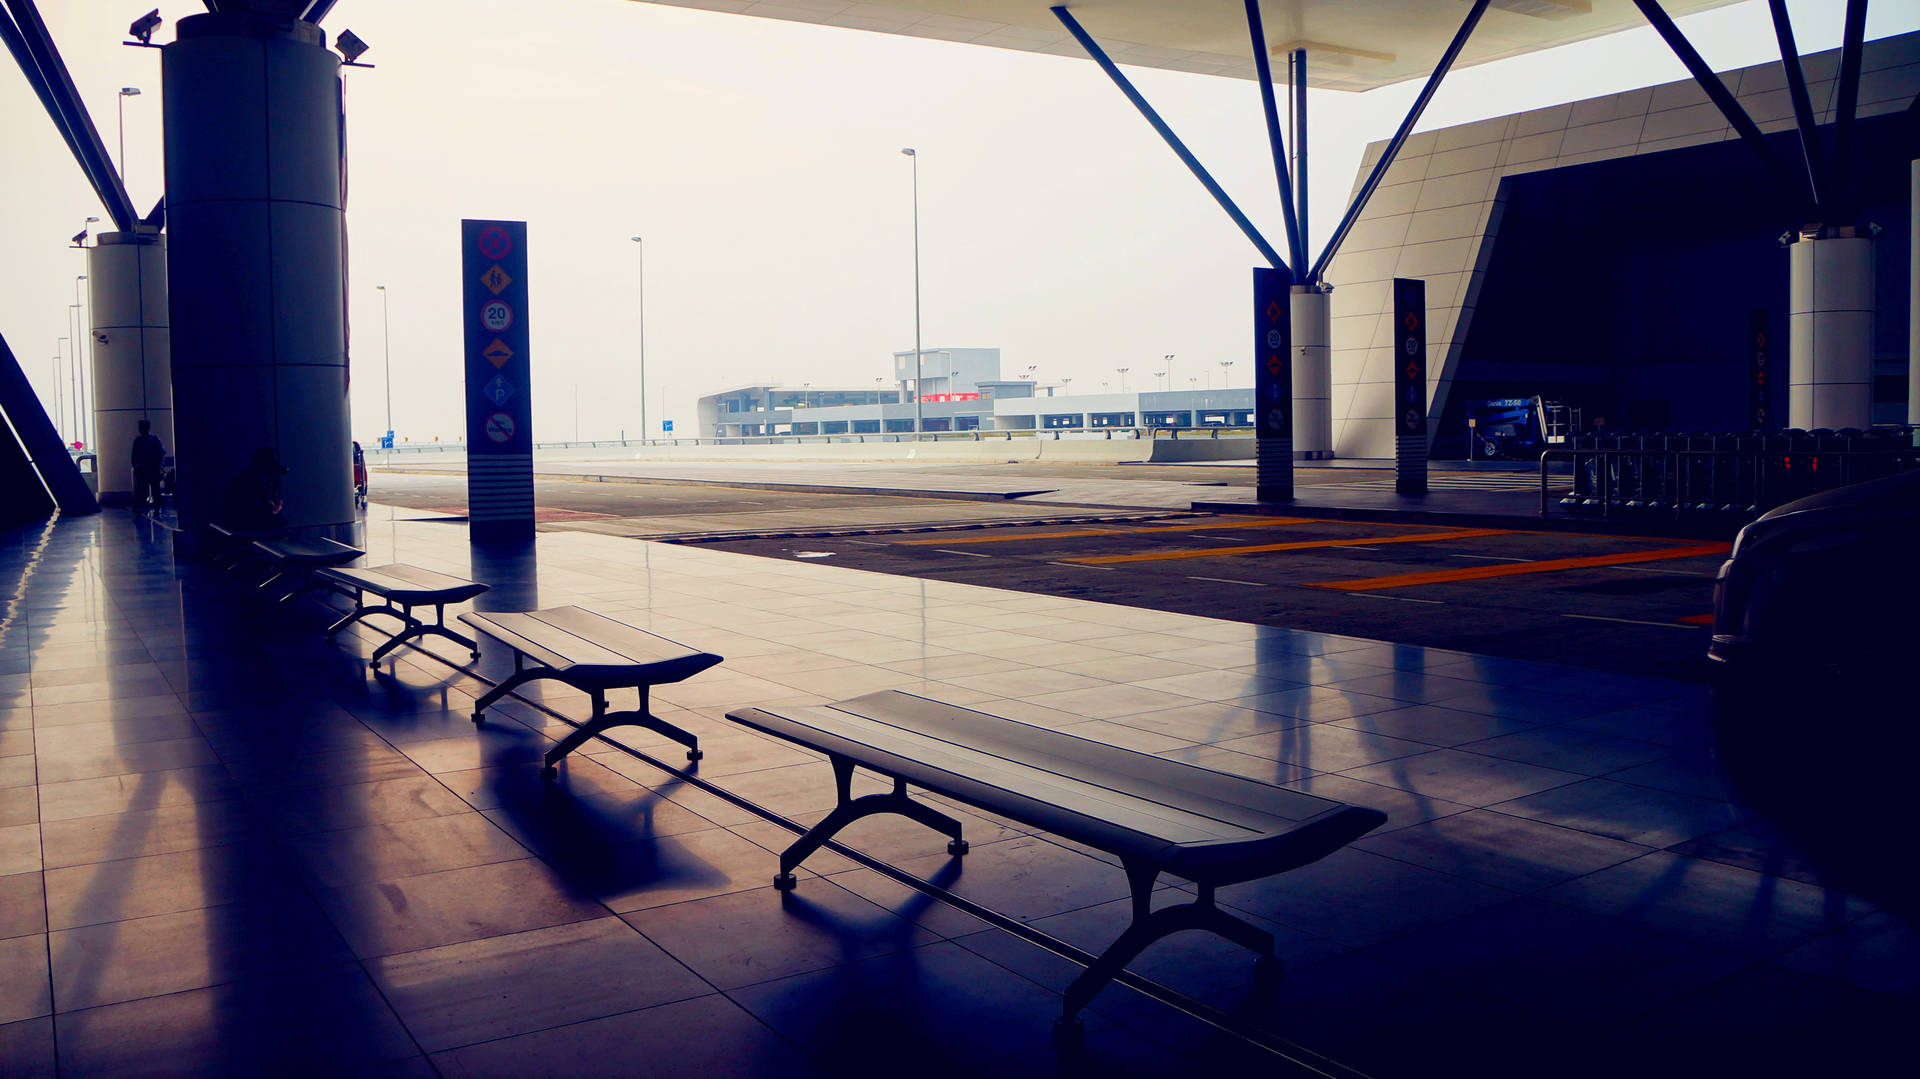 Airport Bench Outside The Building